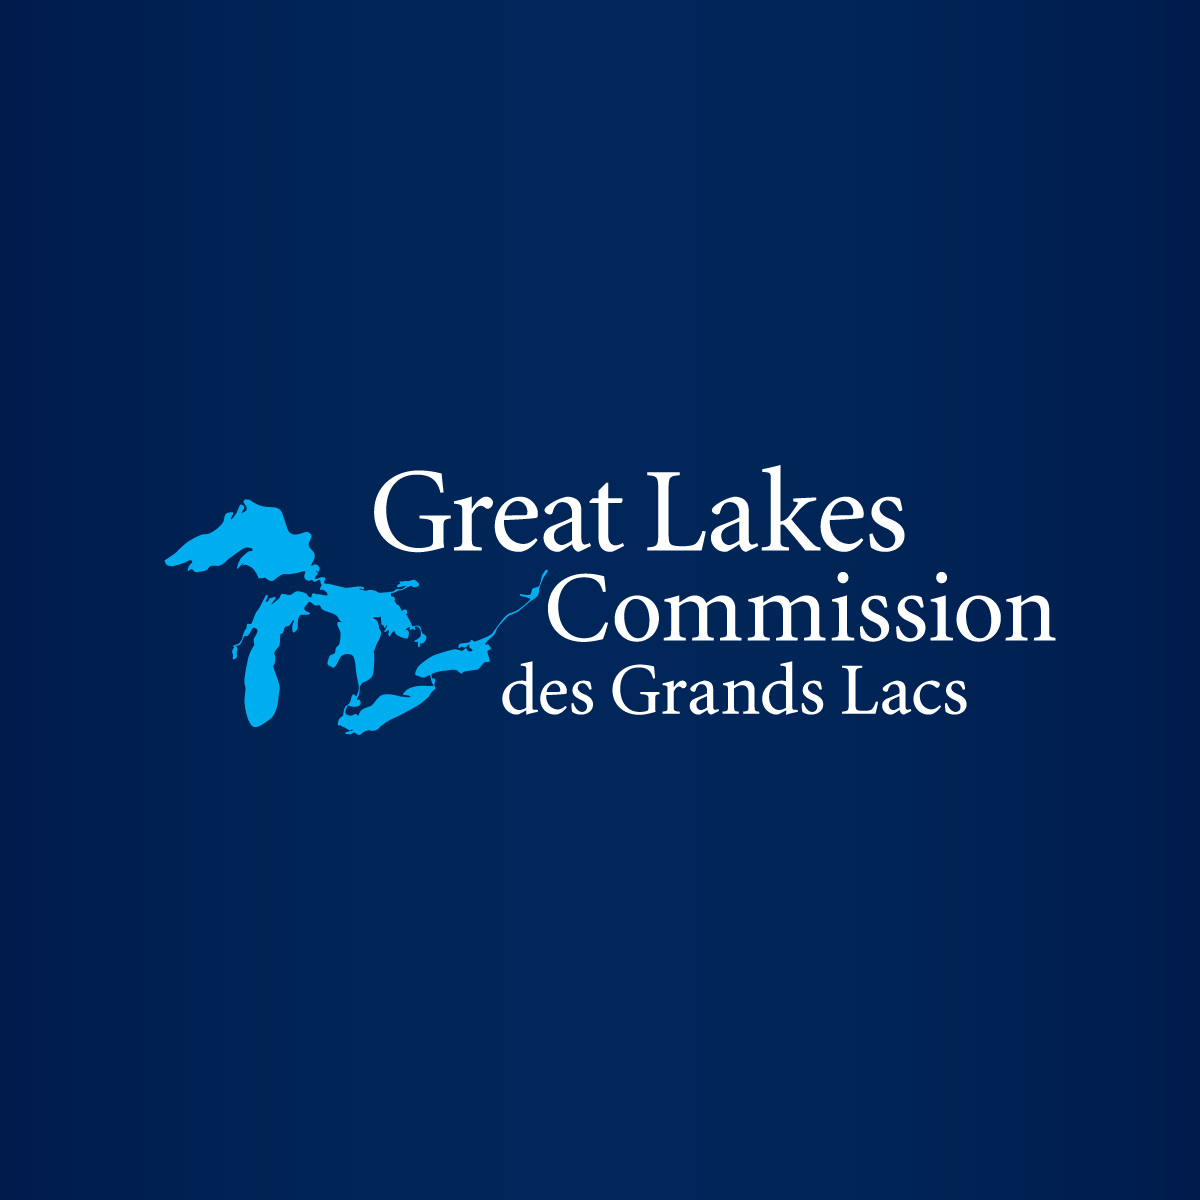 stauber honored with award for great lakes work